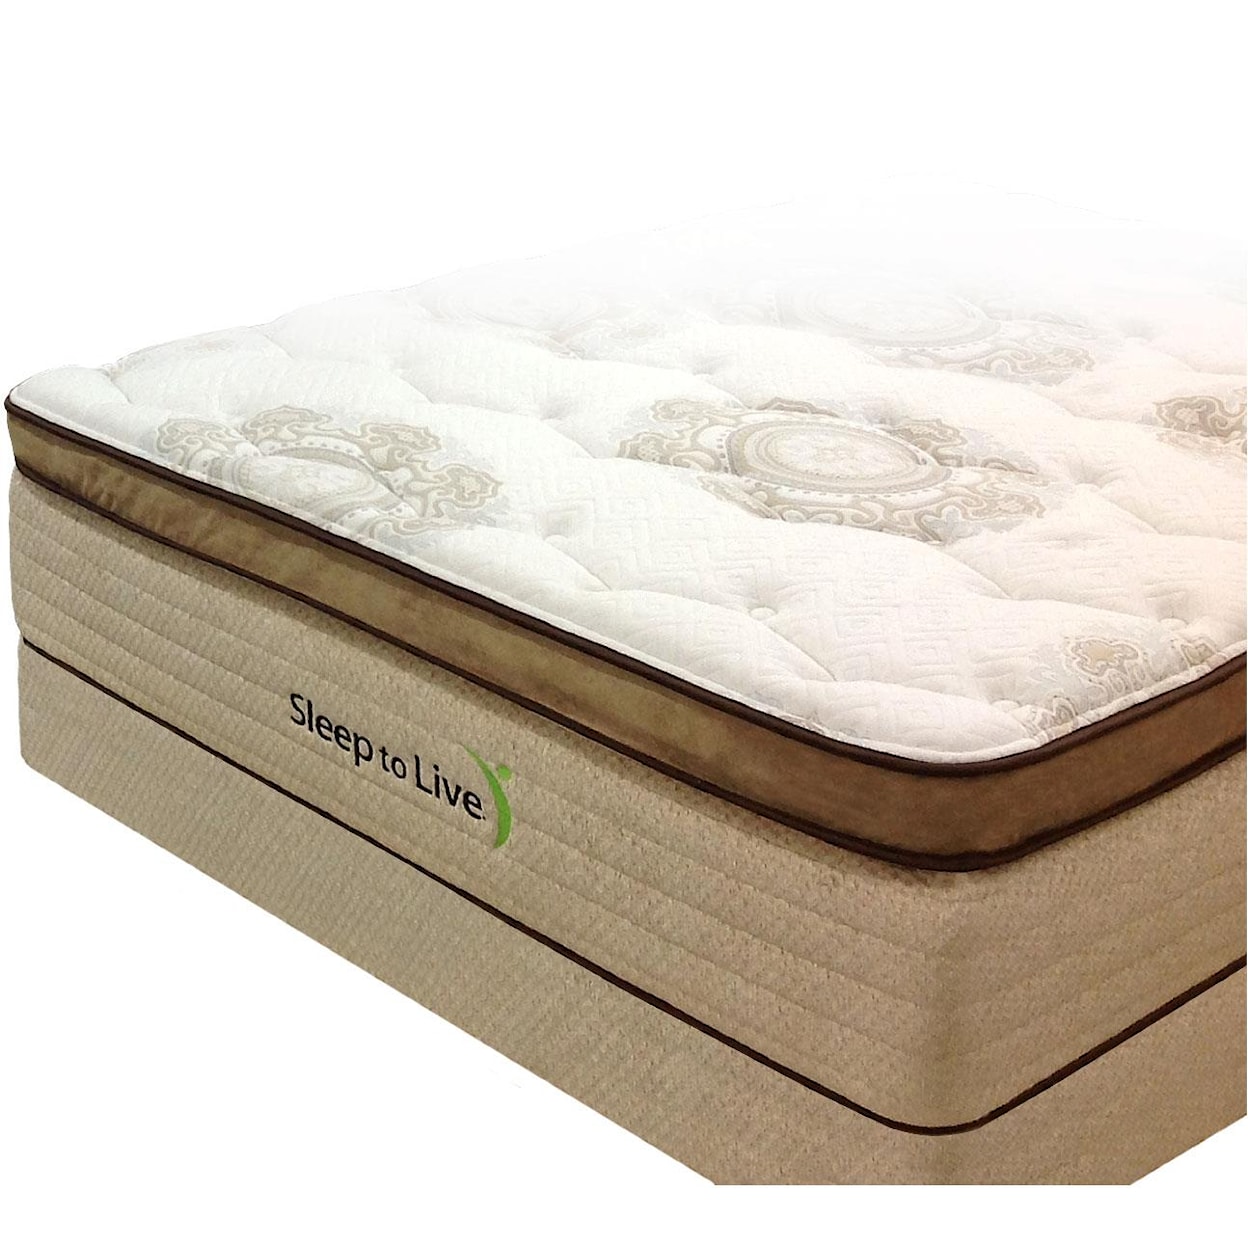 Kingsdown Body System 1 Queen Pocketed Coil Mattress Set